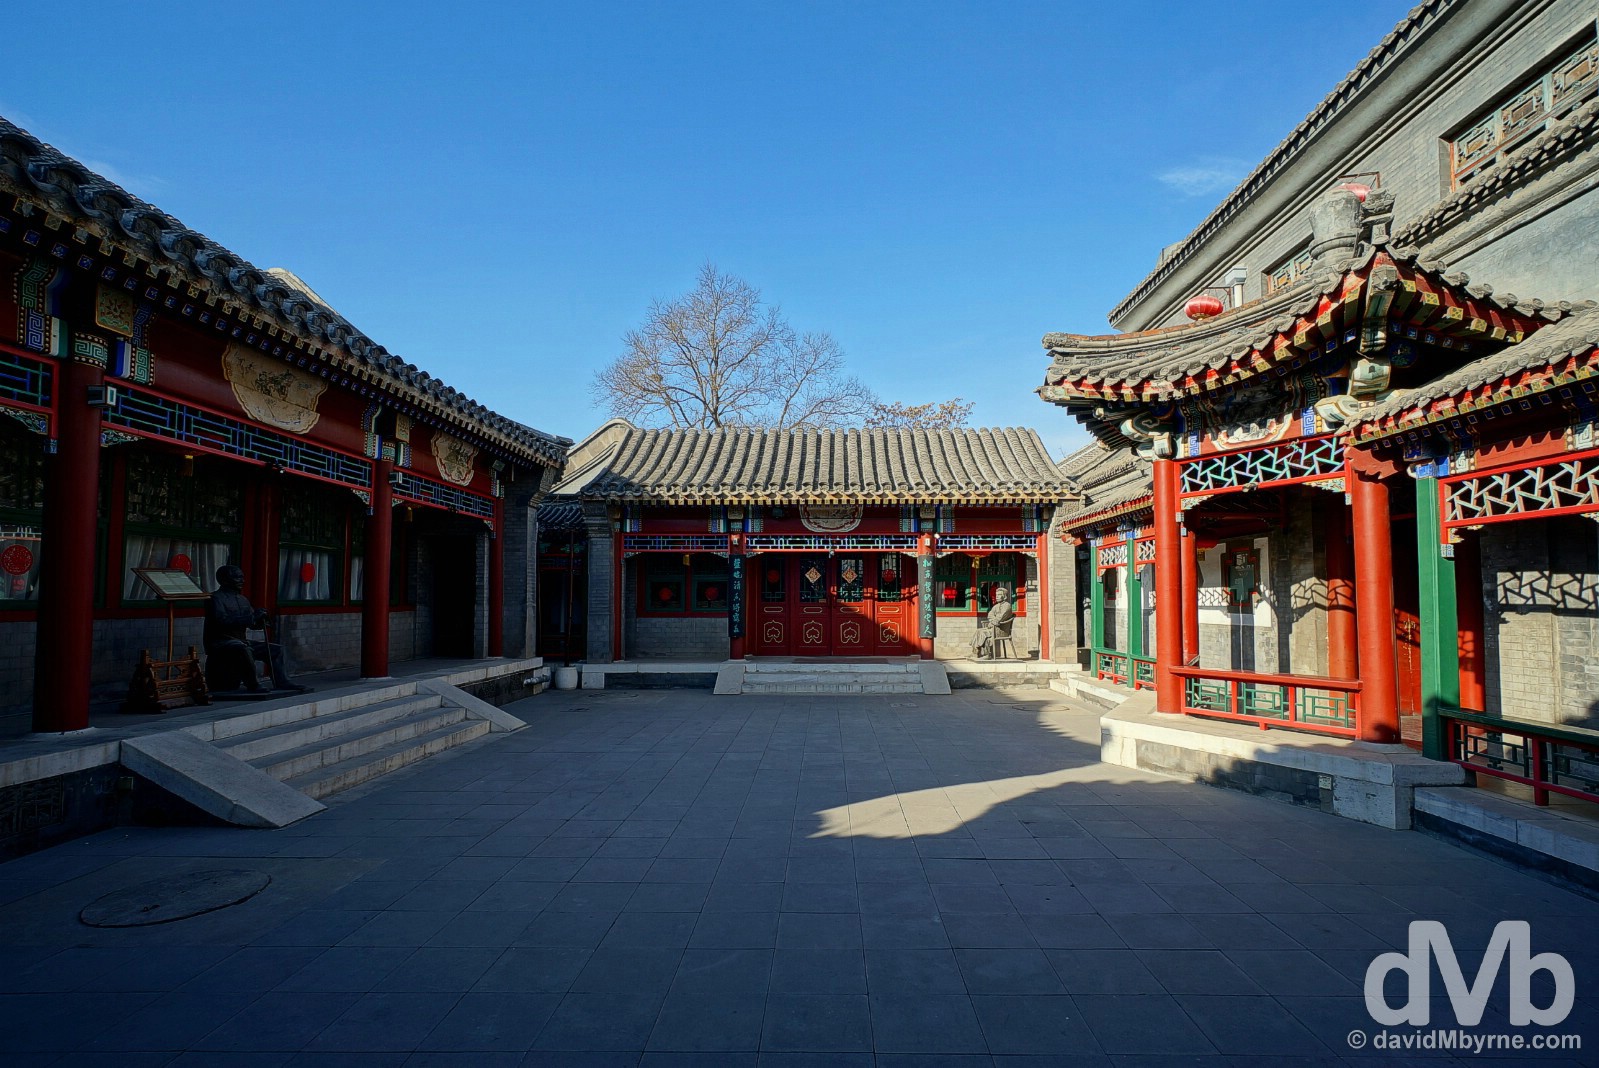 The inner courtyard of the Lu Song Yuan Hotel in the Banchang Hutong in the Dongcheng District of Beijing, China. February 4, 2015.